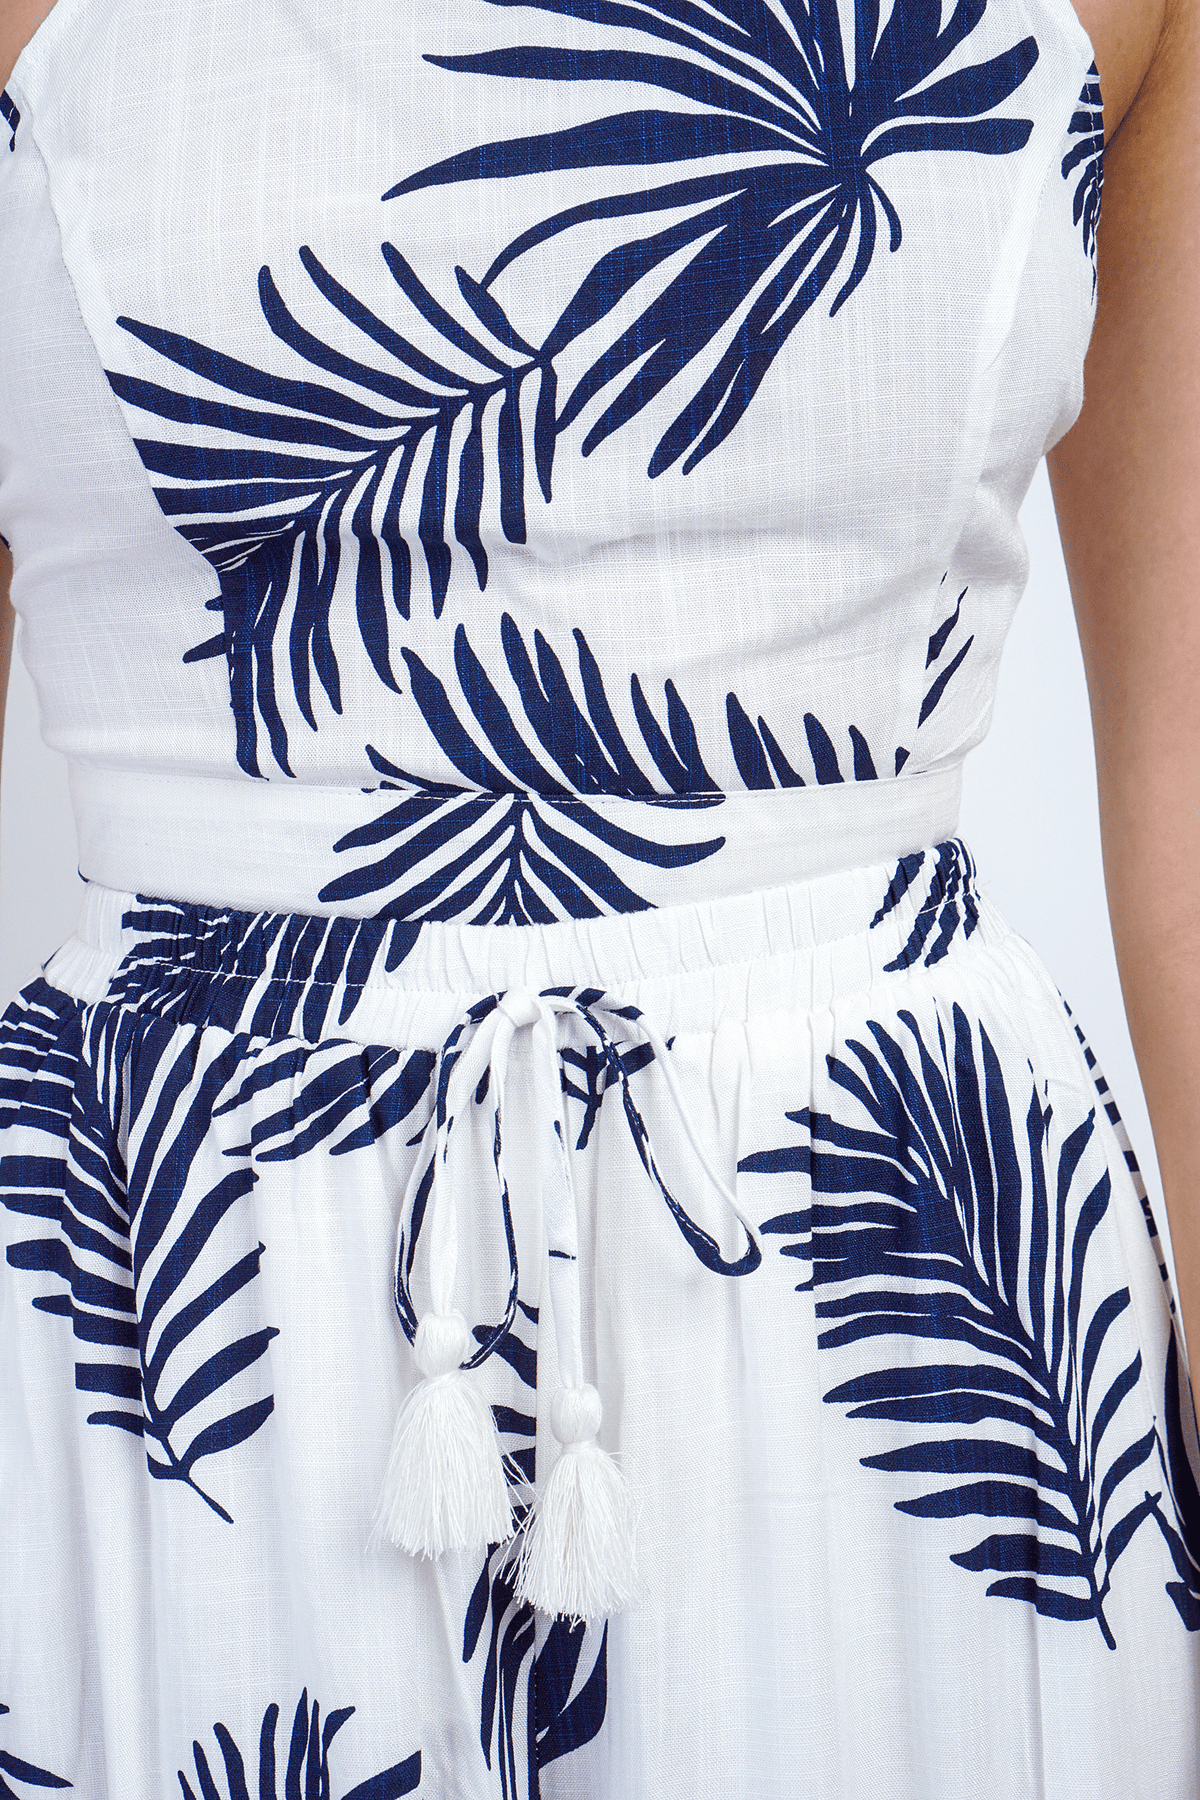 Chloe Dao Boutique PANTS Navy and White Tropical Leaf Set!